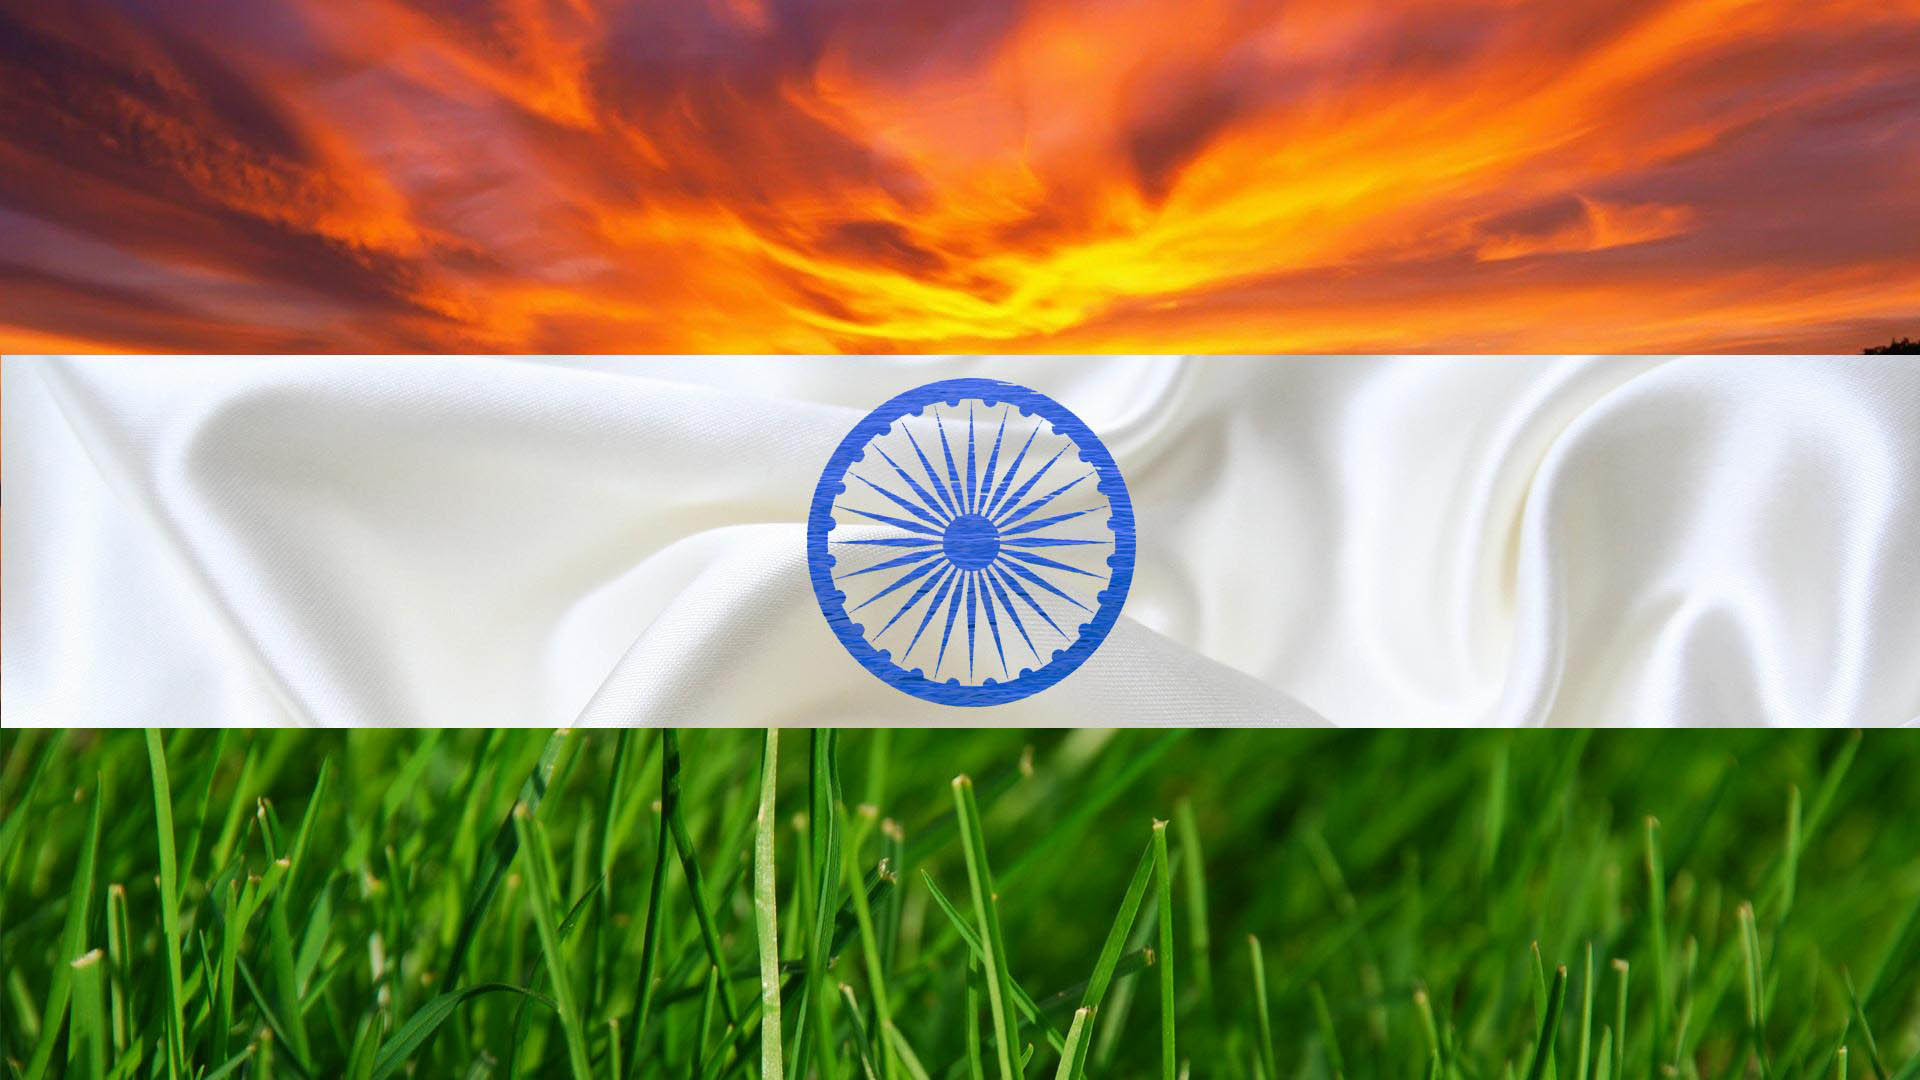 1920x1080 Happy independence day indian flag with ashok chakra hd wallpaper. Â«Â«